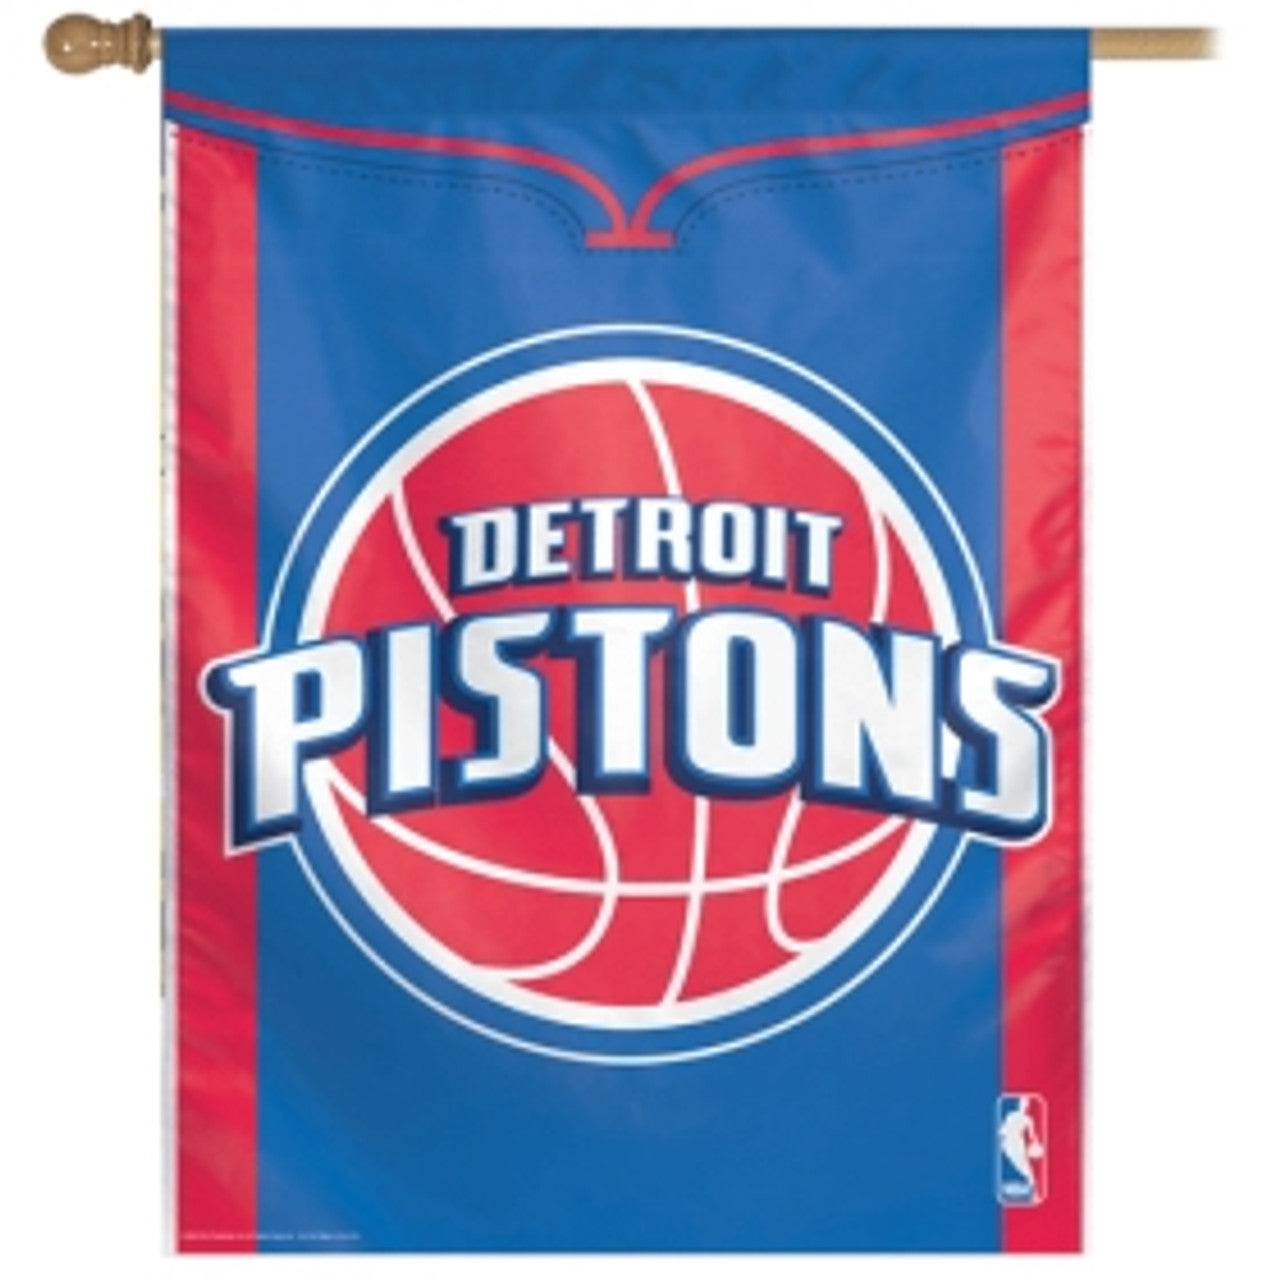 Detroit Pistons 28" x 40" Vertical House Flag/Banner by Wincraft